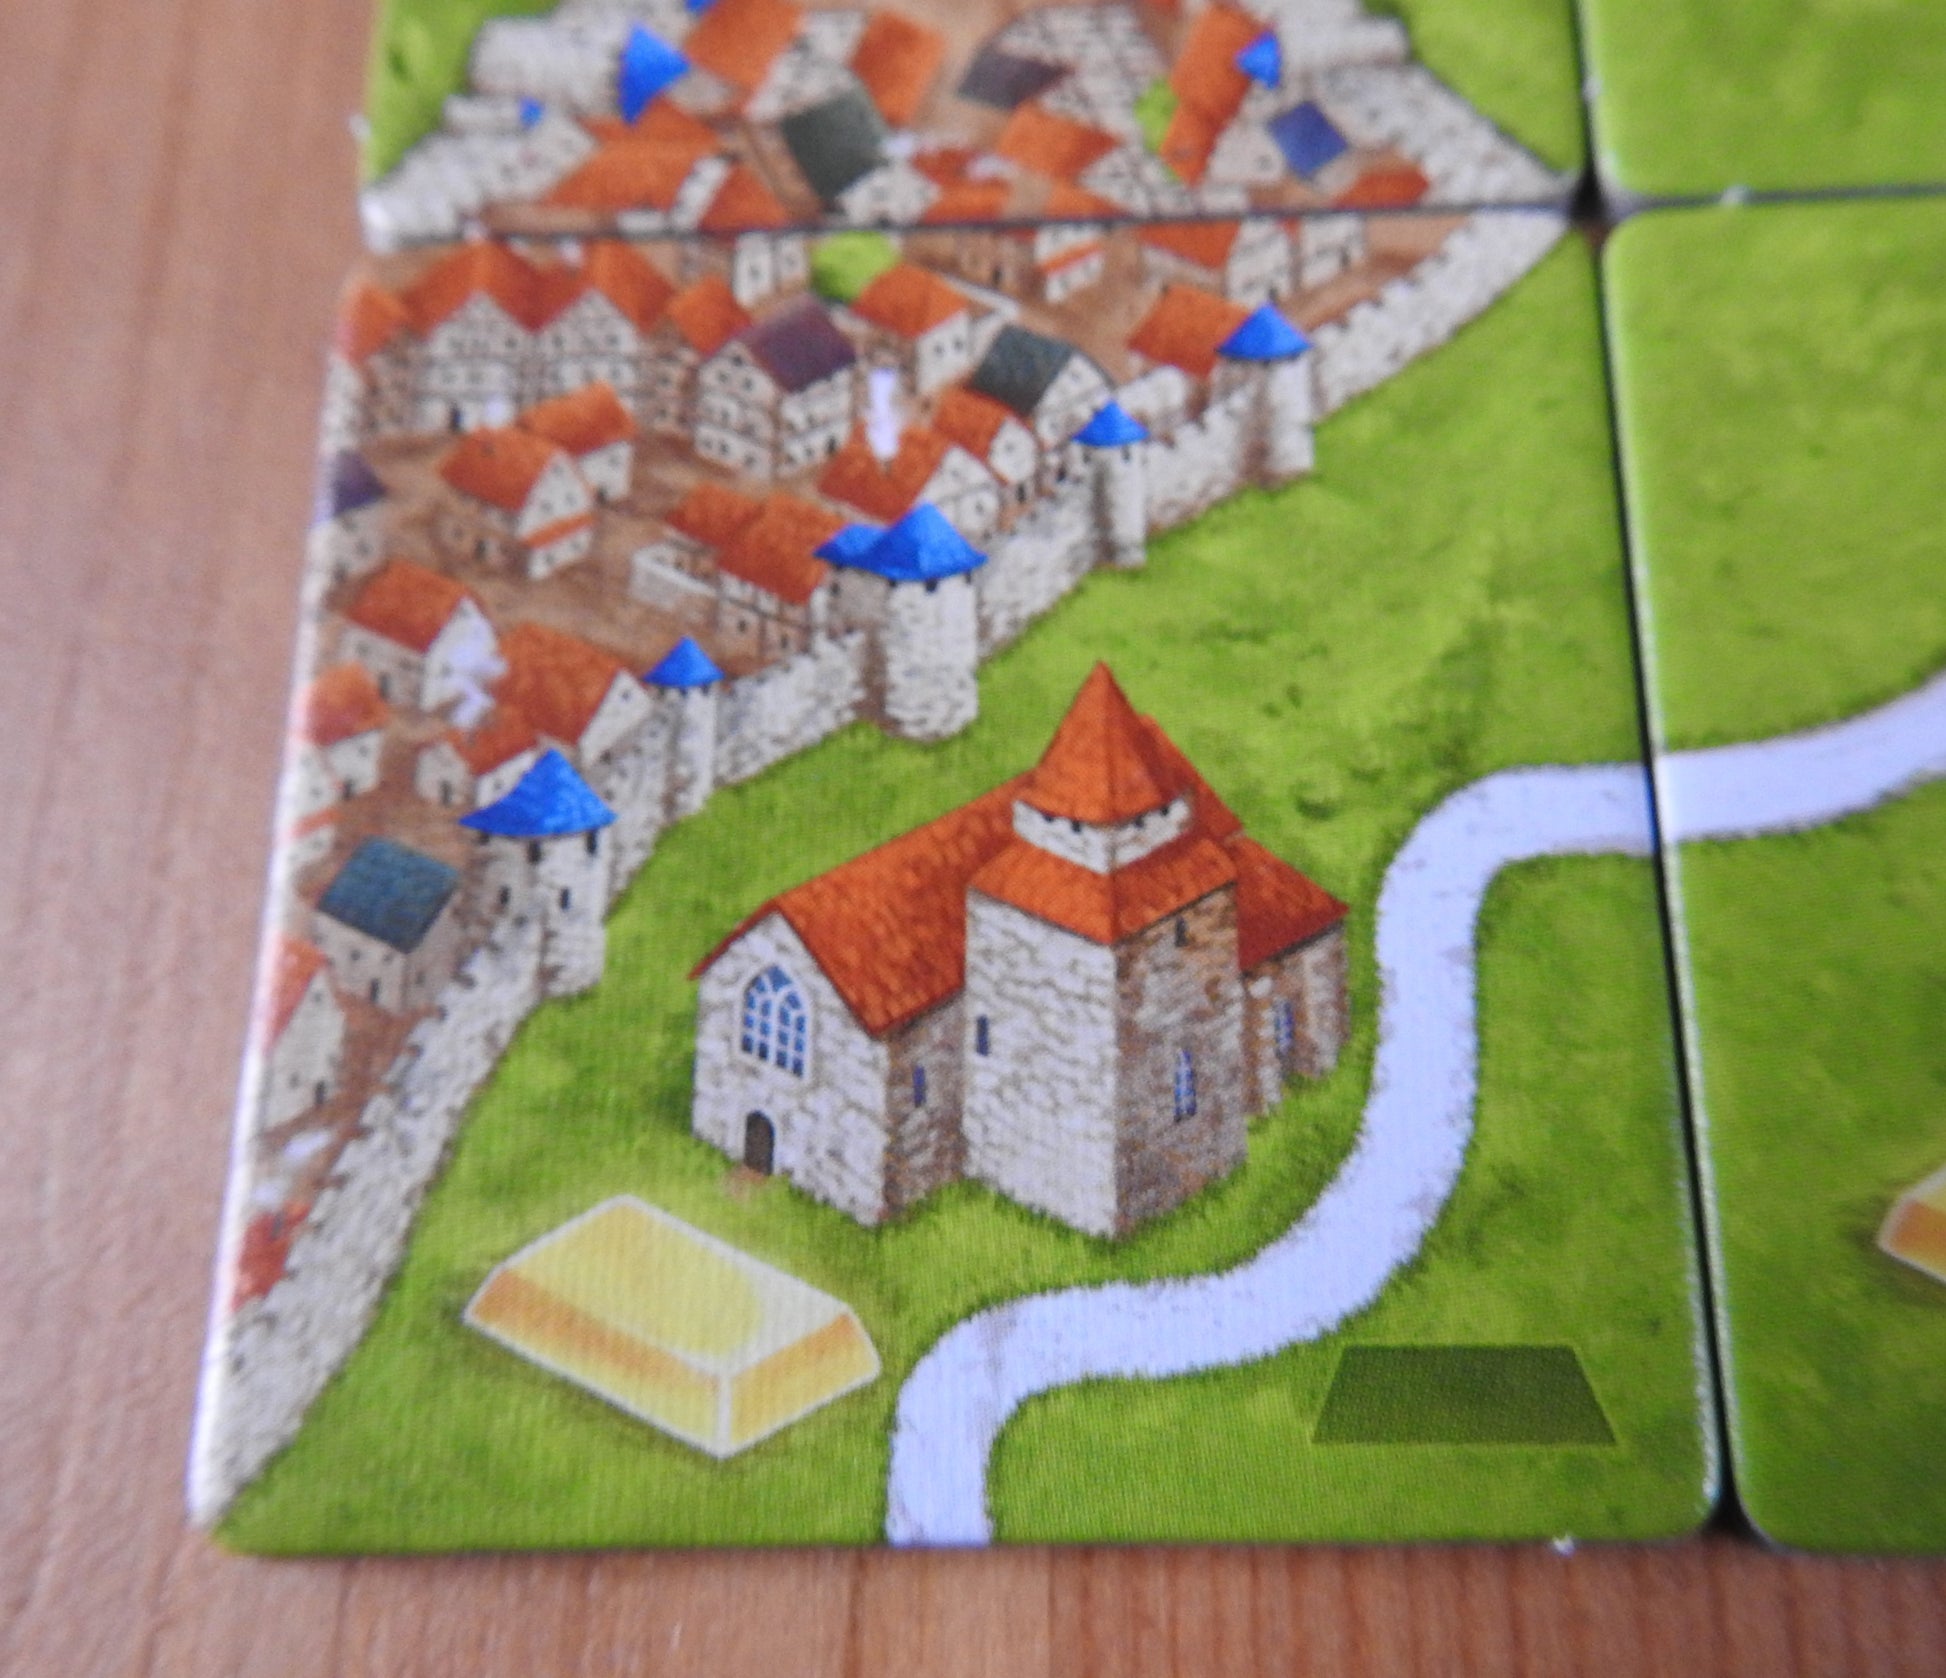 A final view of a landscape tile showing part of a city and a road, that is included in this Carcassonne Gold Mines expansion.